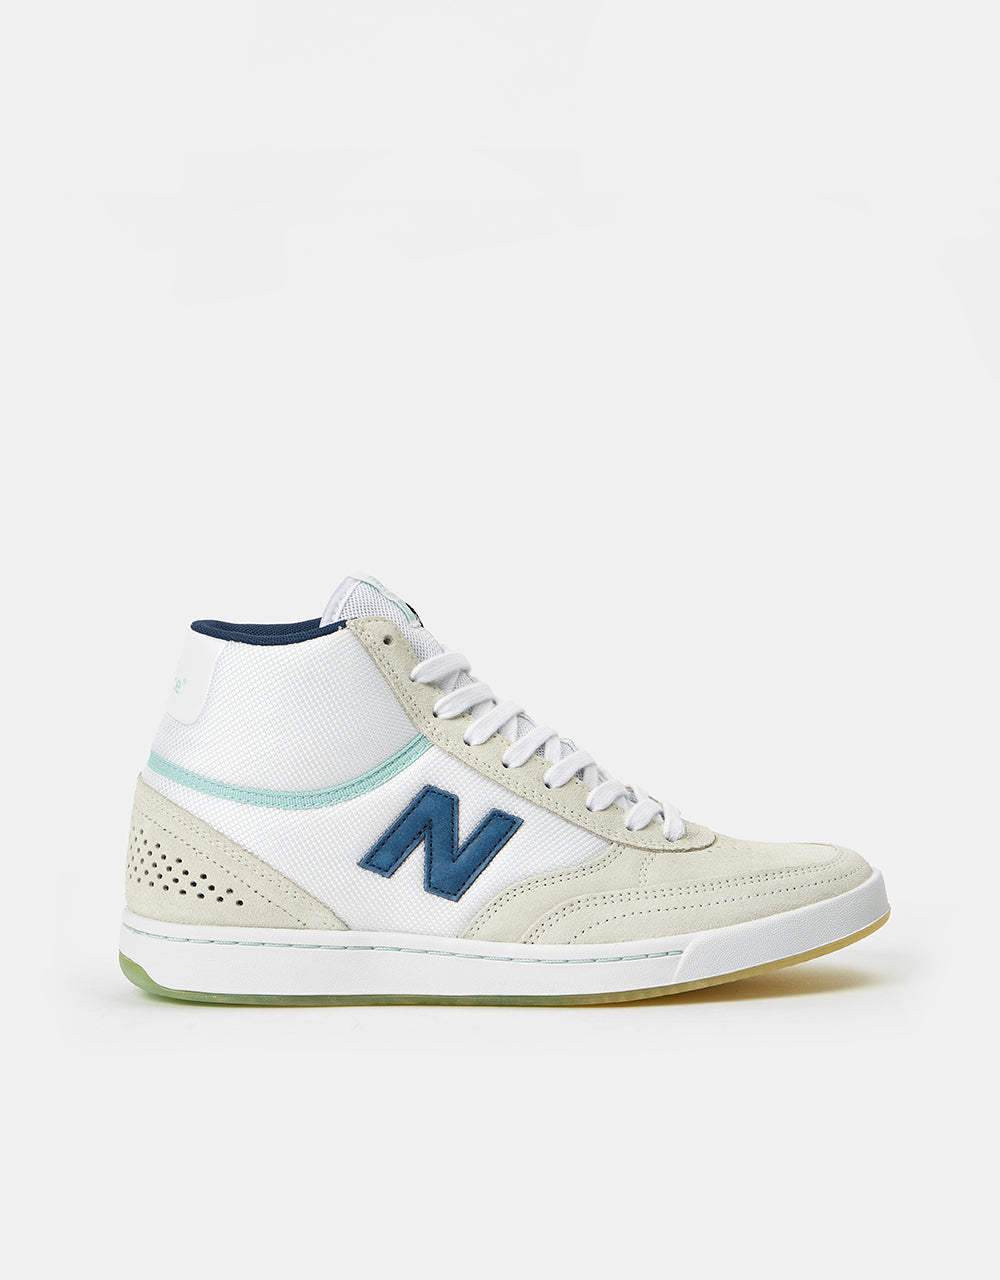 New Balance Numeric x Tom Knox 440 Hi Skate Shoes - White/Navy – Route One